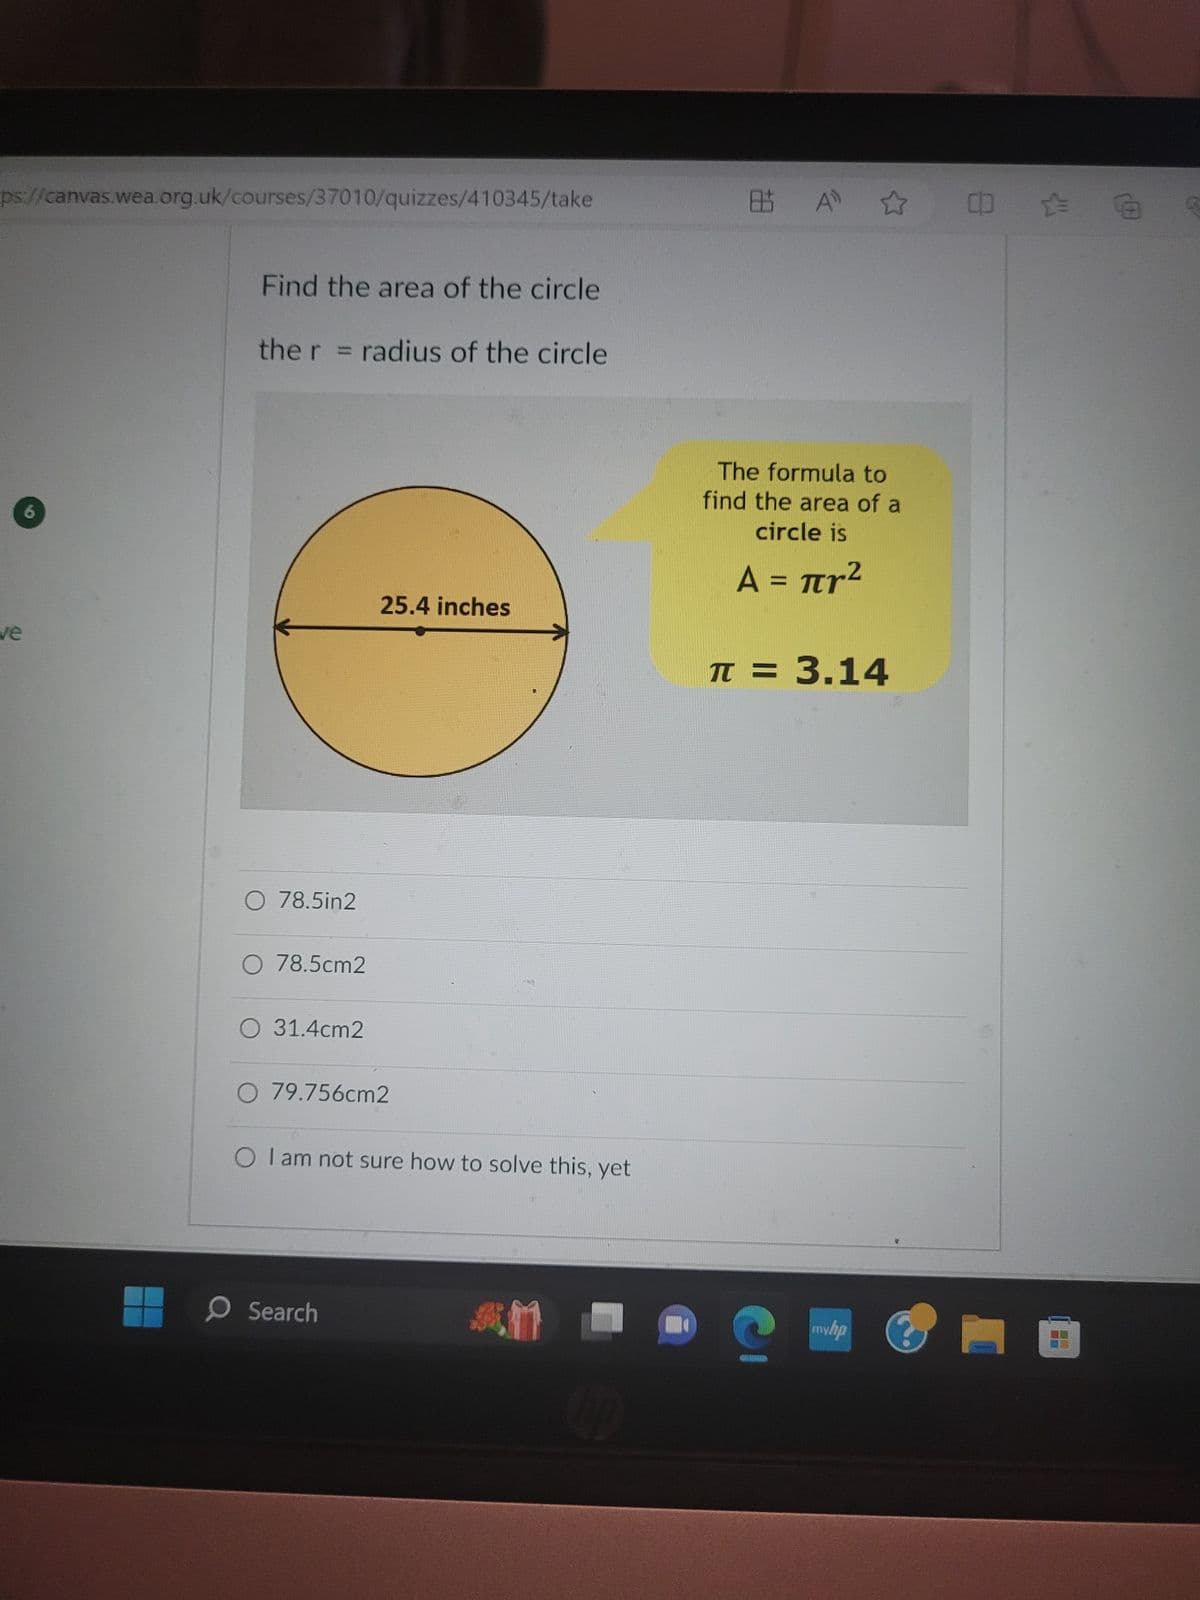 ps://canvas.wea.org.uk/courses/37010/quizzes/410345/take
ve
Find the area of the circle
the r = radius of the circle
O 78.5in2
O 78.5cm2
O 31.4cm2
25.4 inches
O 79.756cm2
O I am not sure how to solve this, yet
O Search
AM
09
85 A
The formula to
find the area of a
circle is
Α = πr2
π = 3.14
G
mw.hp
0:0